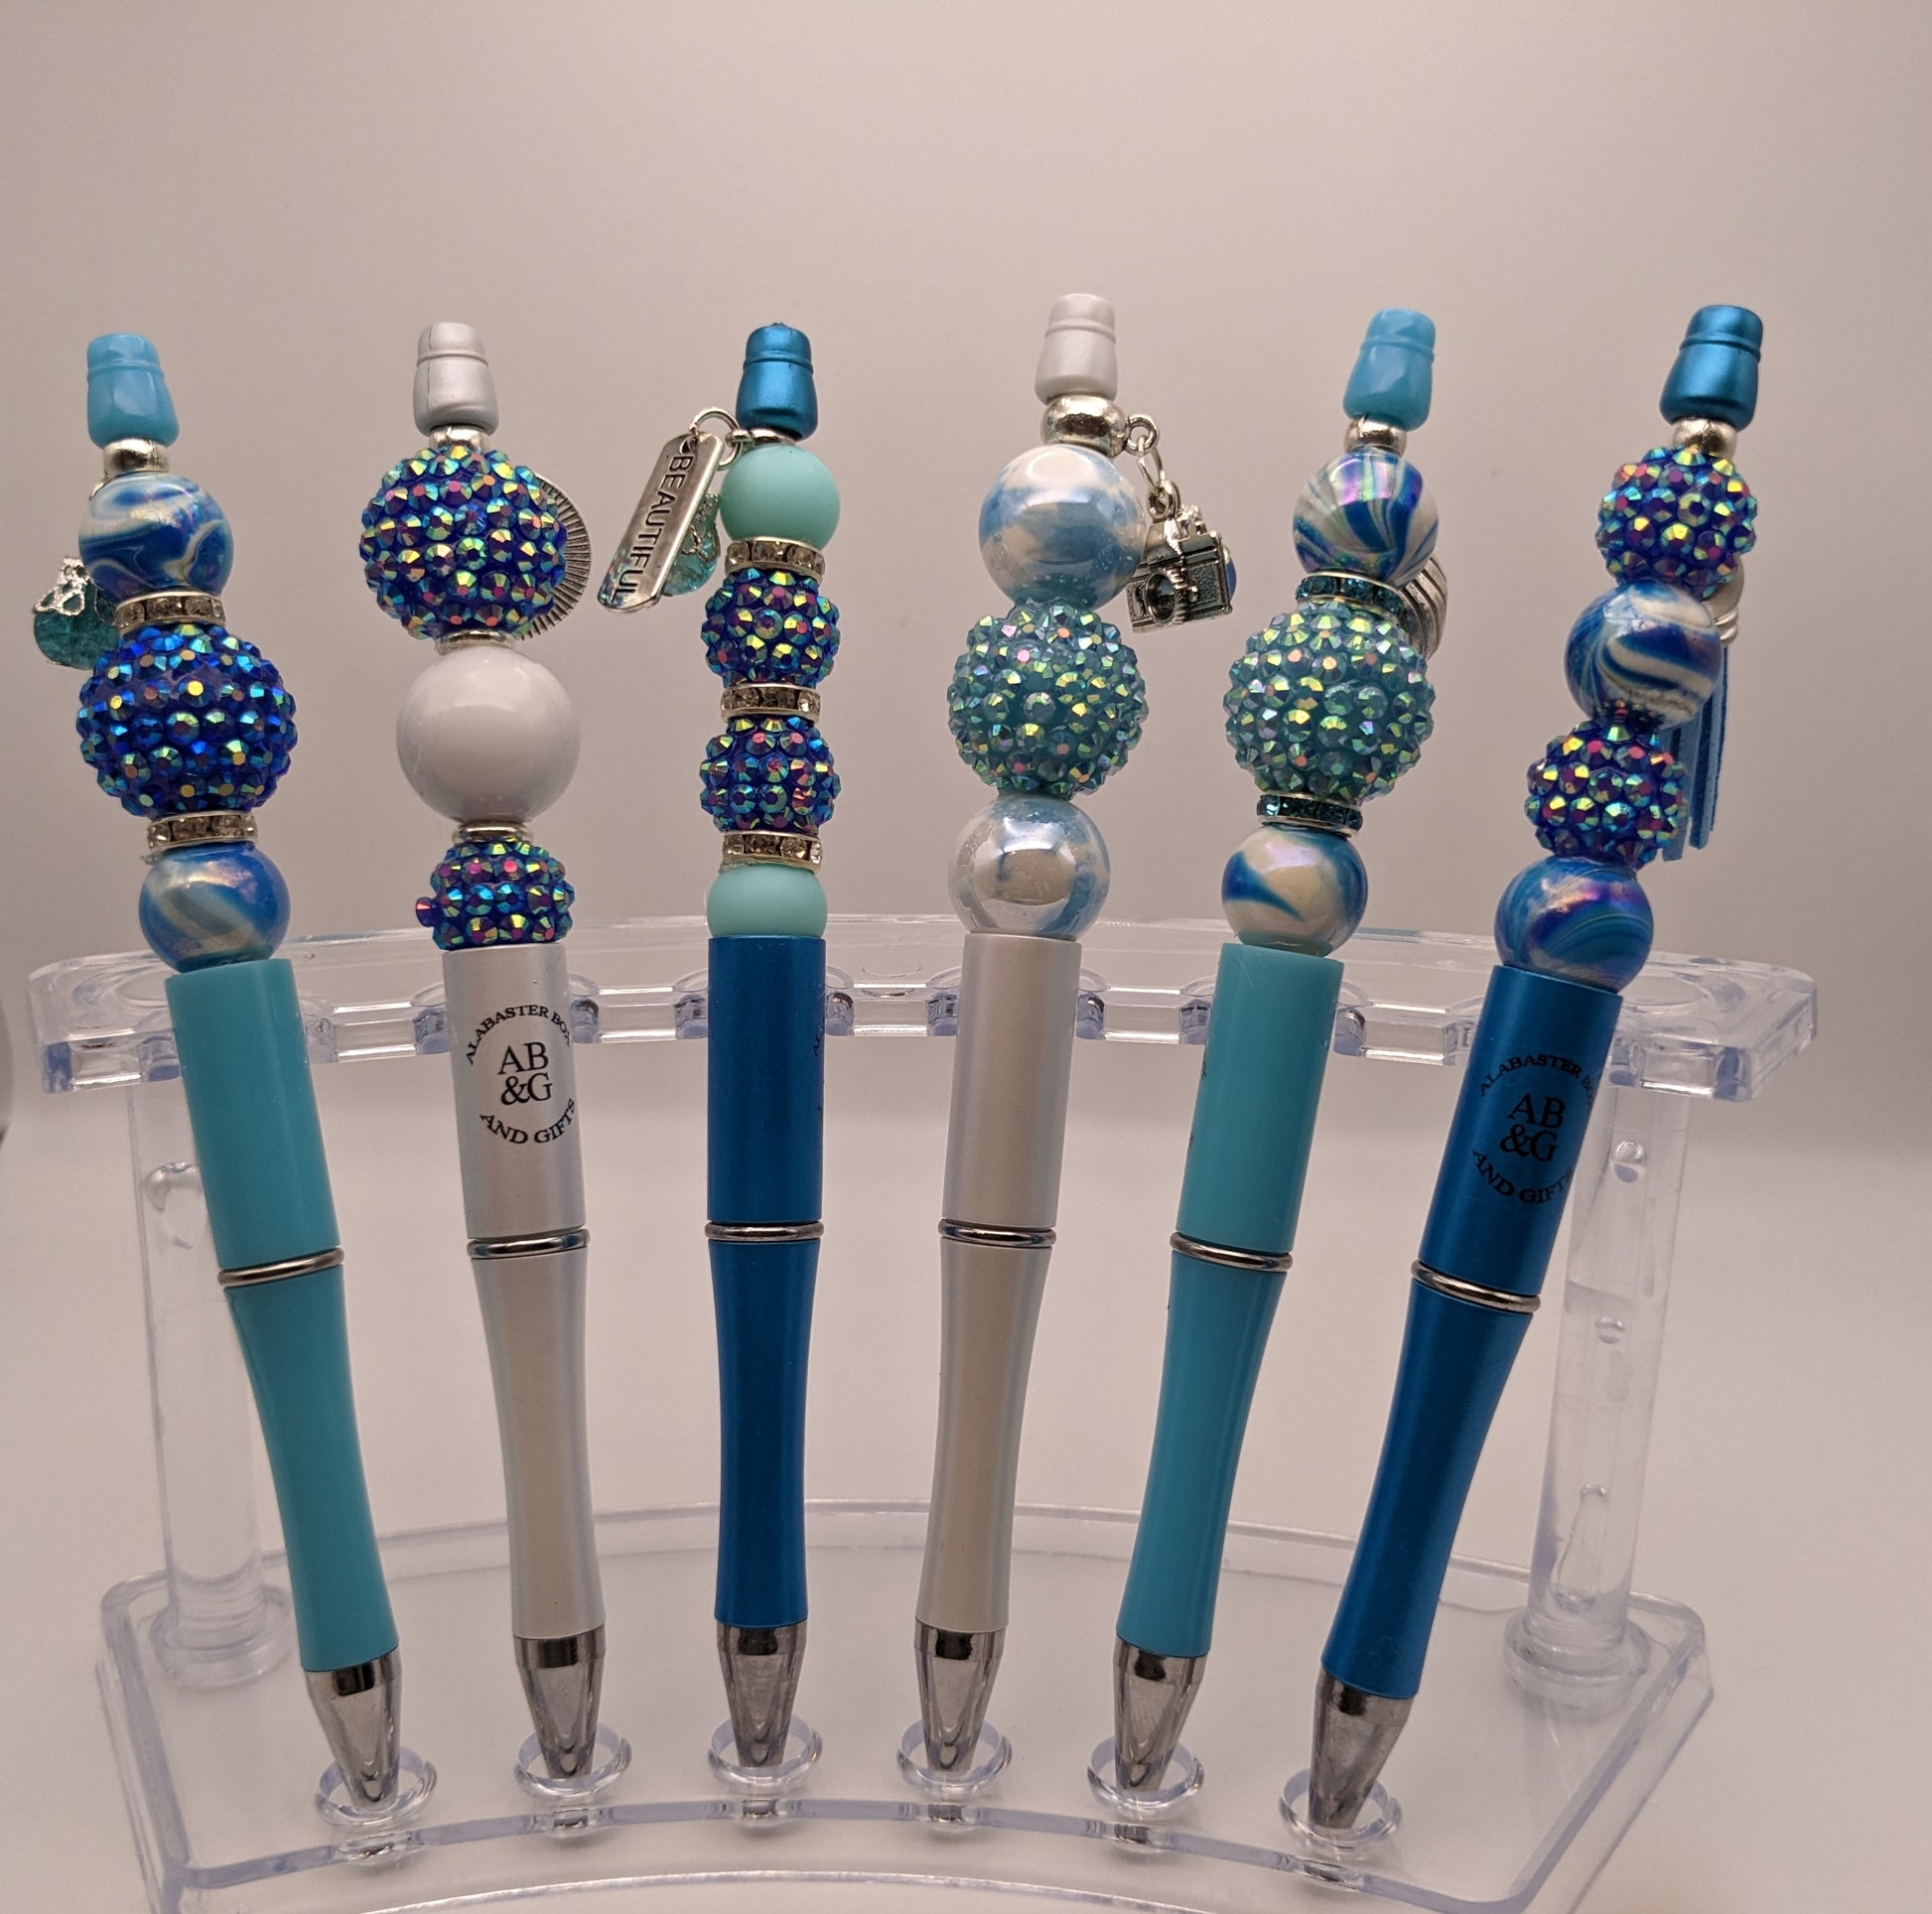 Decorative pen with beads